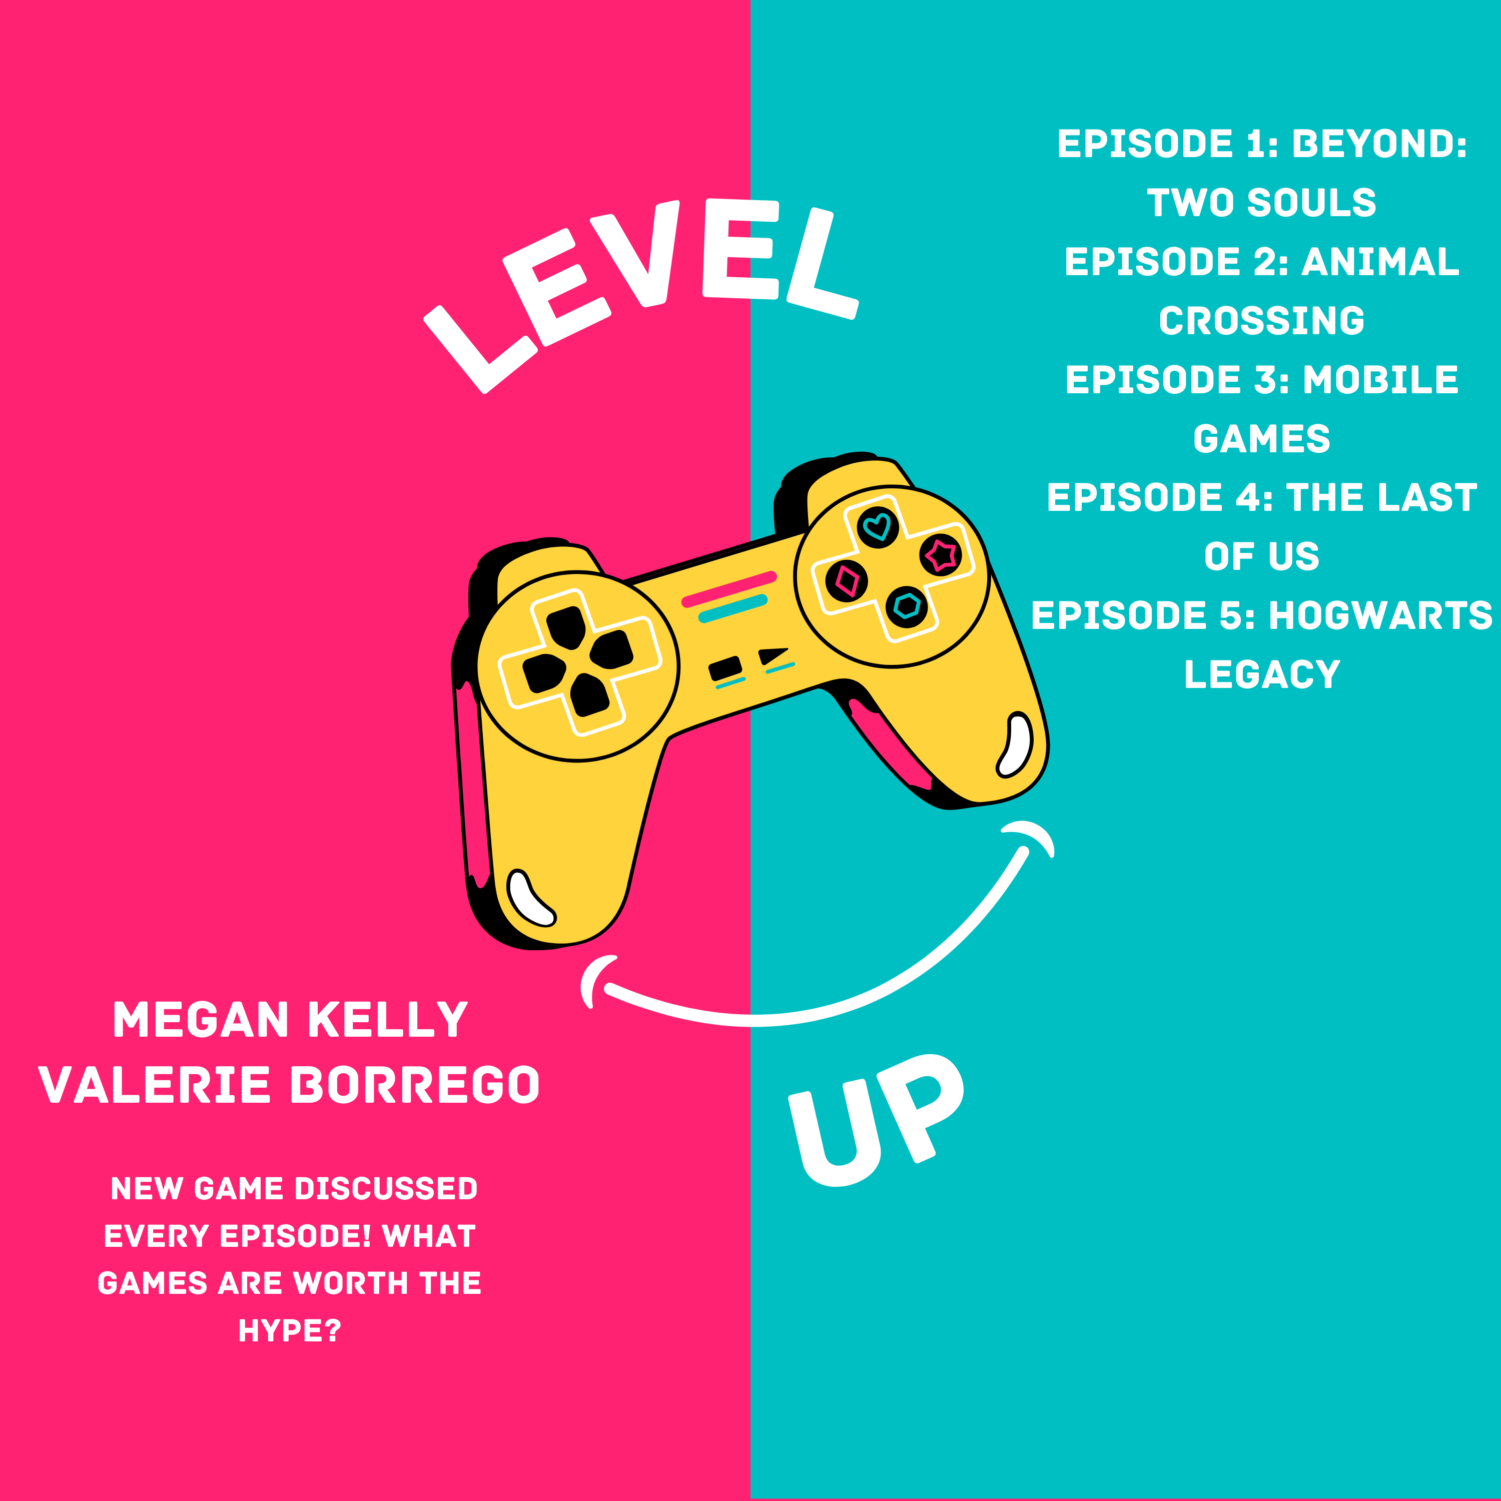 Level Up is a podcast that discusses a popular video game every episode. We give our thoughts and see if the game is worth playing or not.